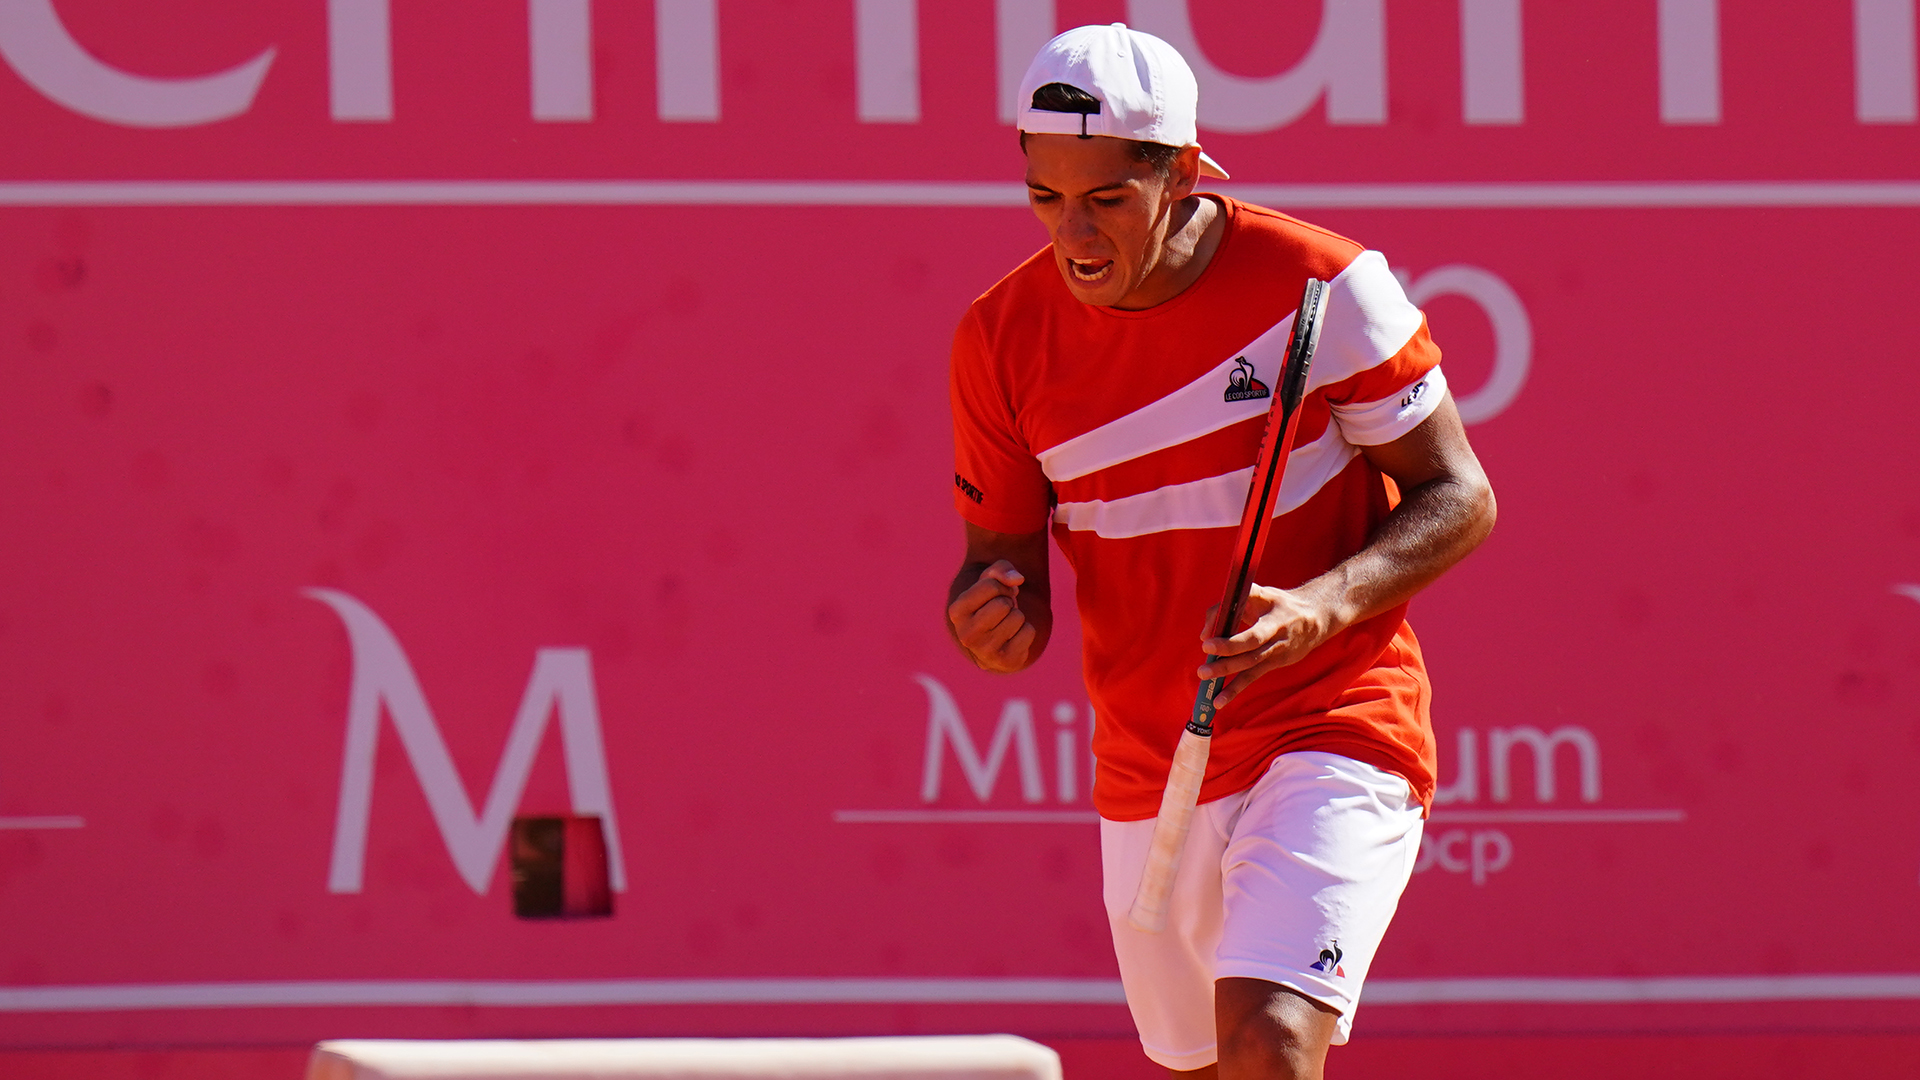 ESTORIL, PORTUGAL - MAY 1: Sebastian Baez from Argentina competes against Frances Tiafoe from the United States during the Singles Final on day seven of the Millennium Estoril Open 2022 at Clube de Tenis do Estoril on May 1, 2022 in Estoril, Portugal.  (Photo by Gualter Fatia/Getty Images)